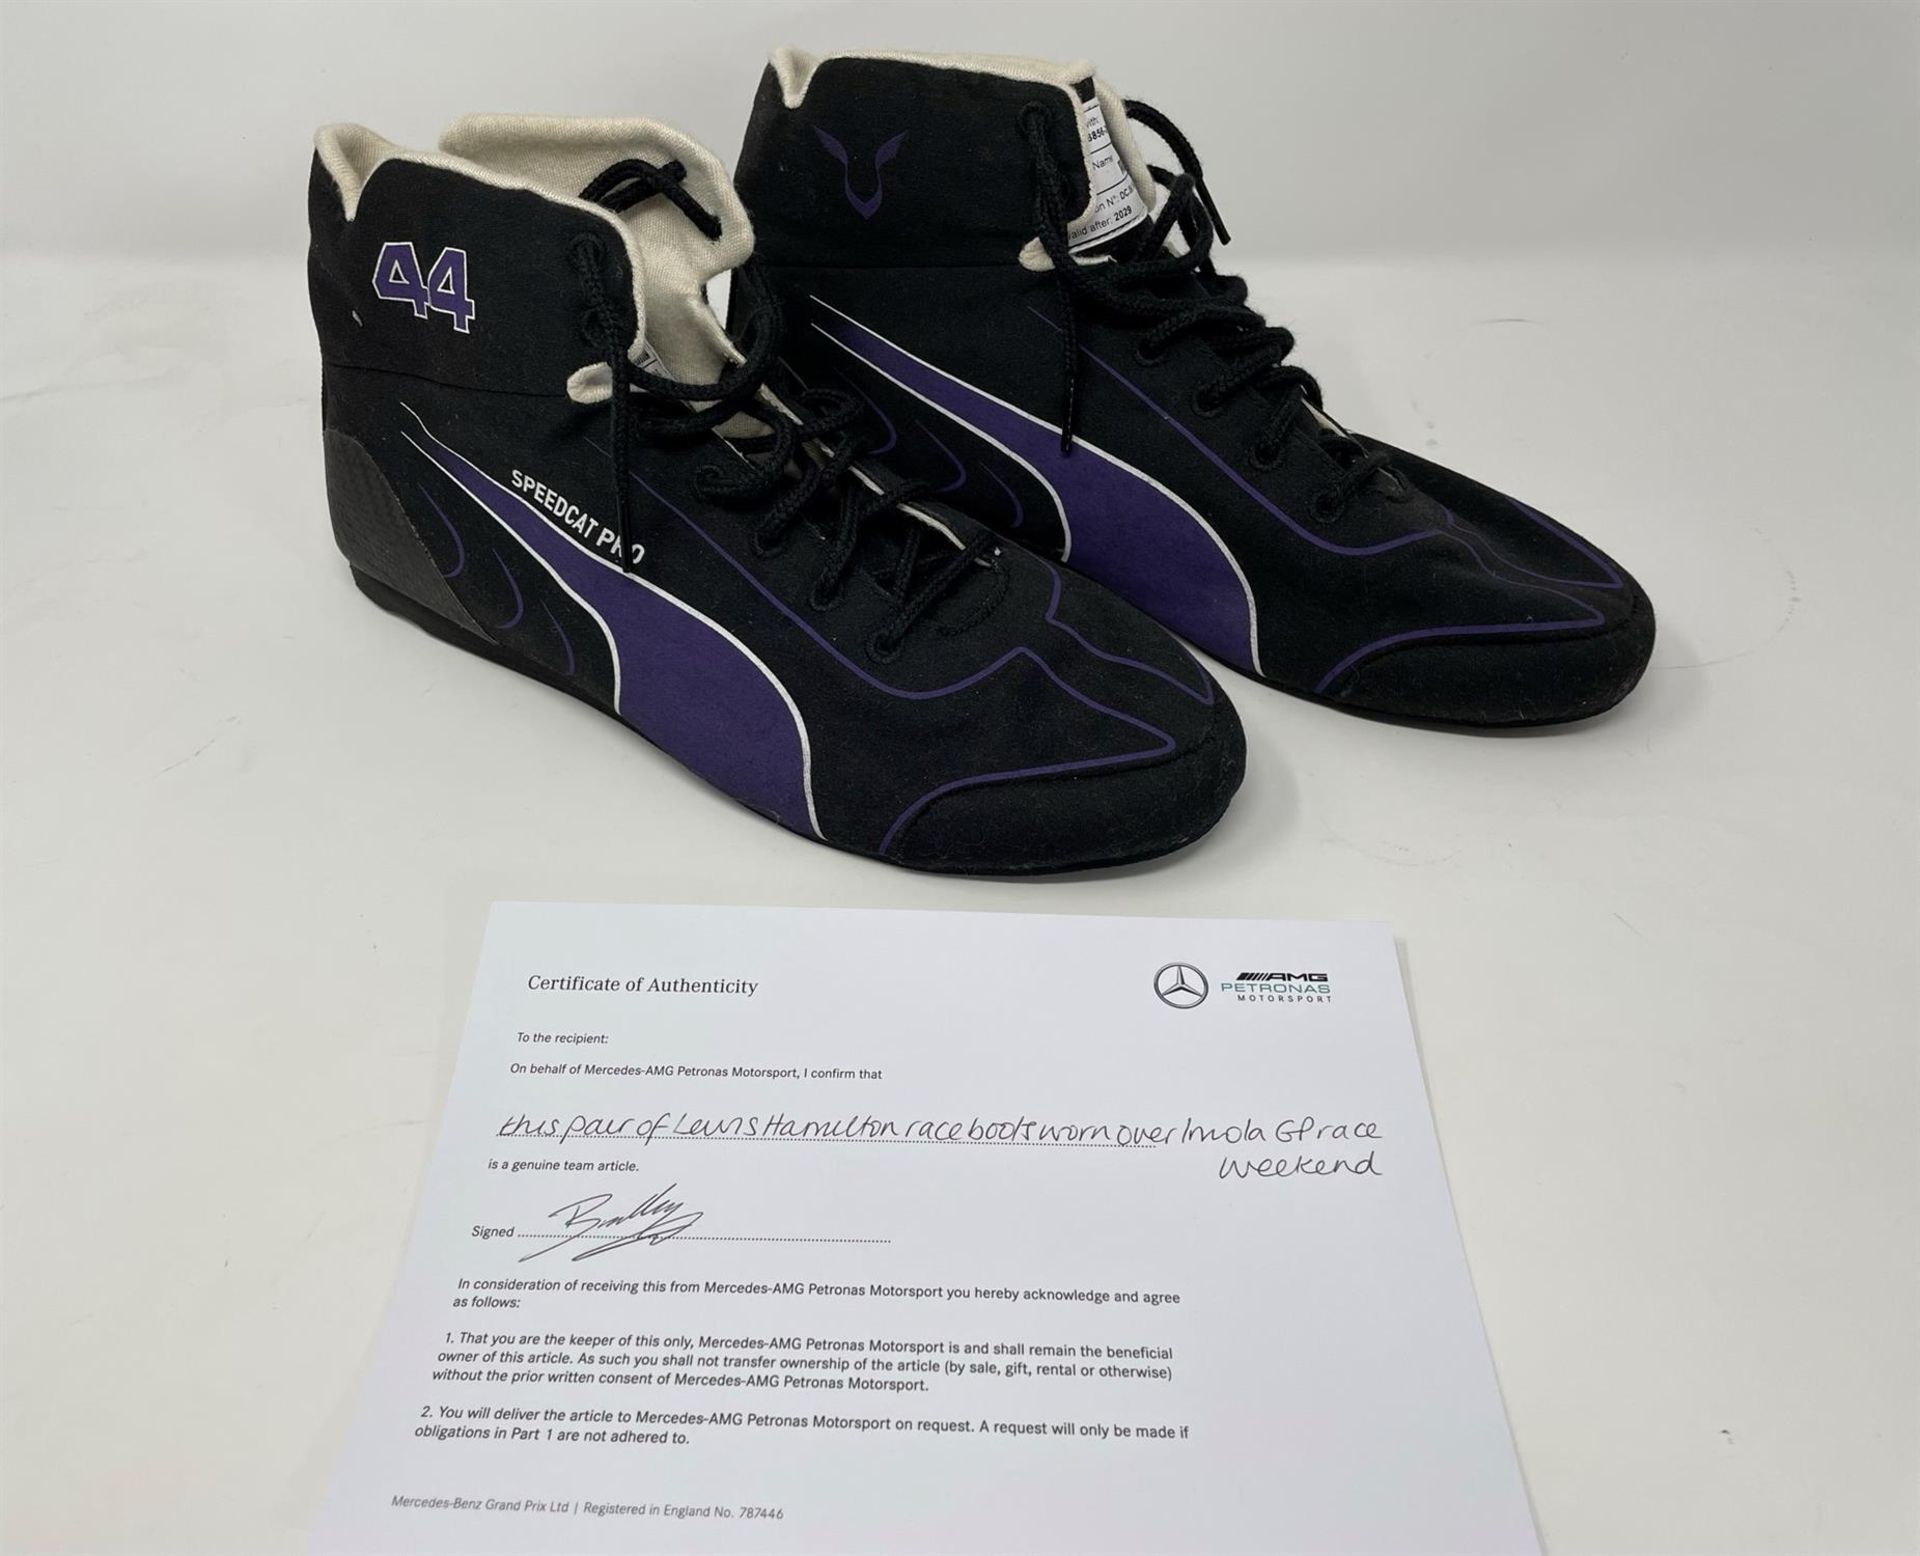 Charity Lot: Lewis Hamilton's Race Boots worn at the Imola 2020 Race Weekend - Image 5 of 10